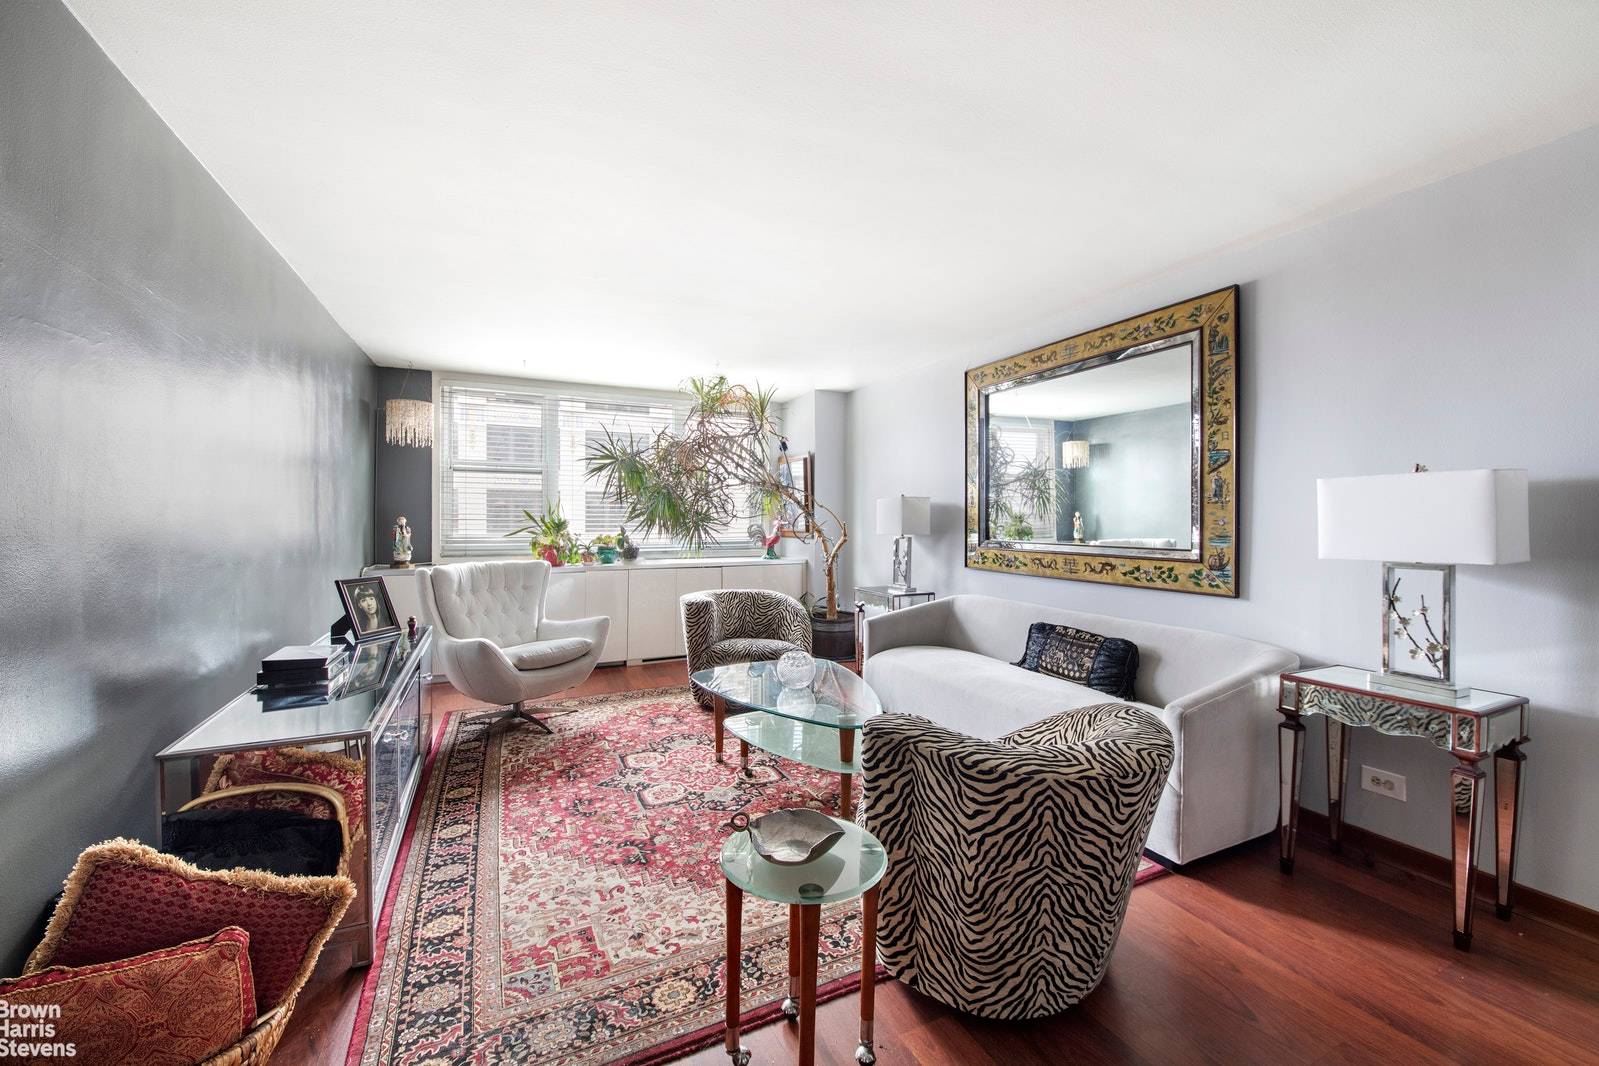 Here's a fabulous opportunity to own a South facing extra large one bedroom with interior den office dining room in the coveted Vermeer Cooperative where Chelsea meets the West Village.